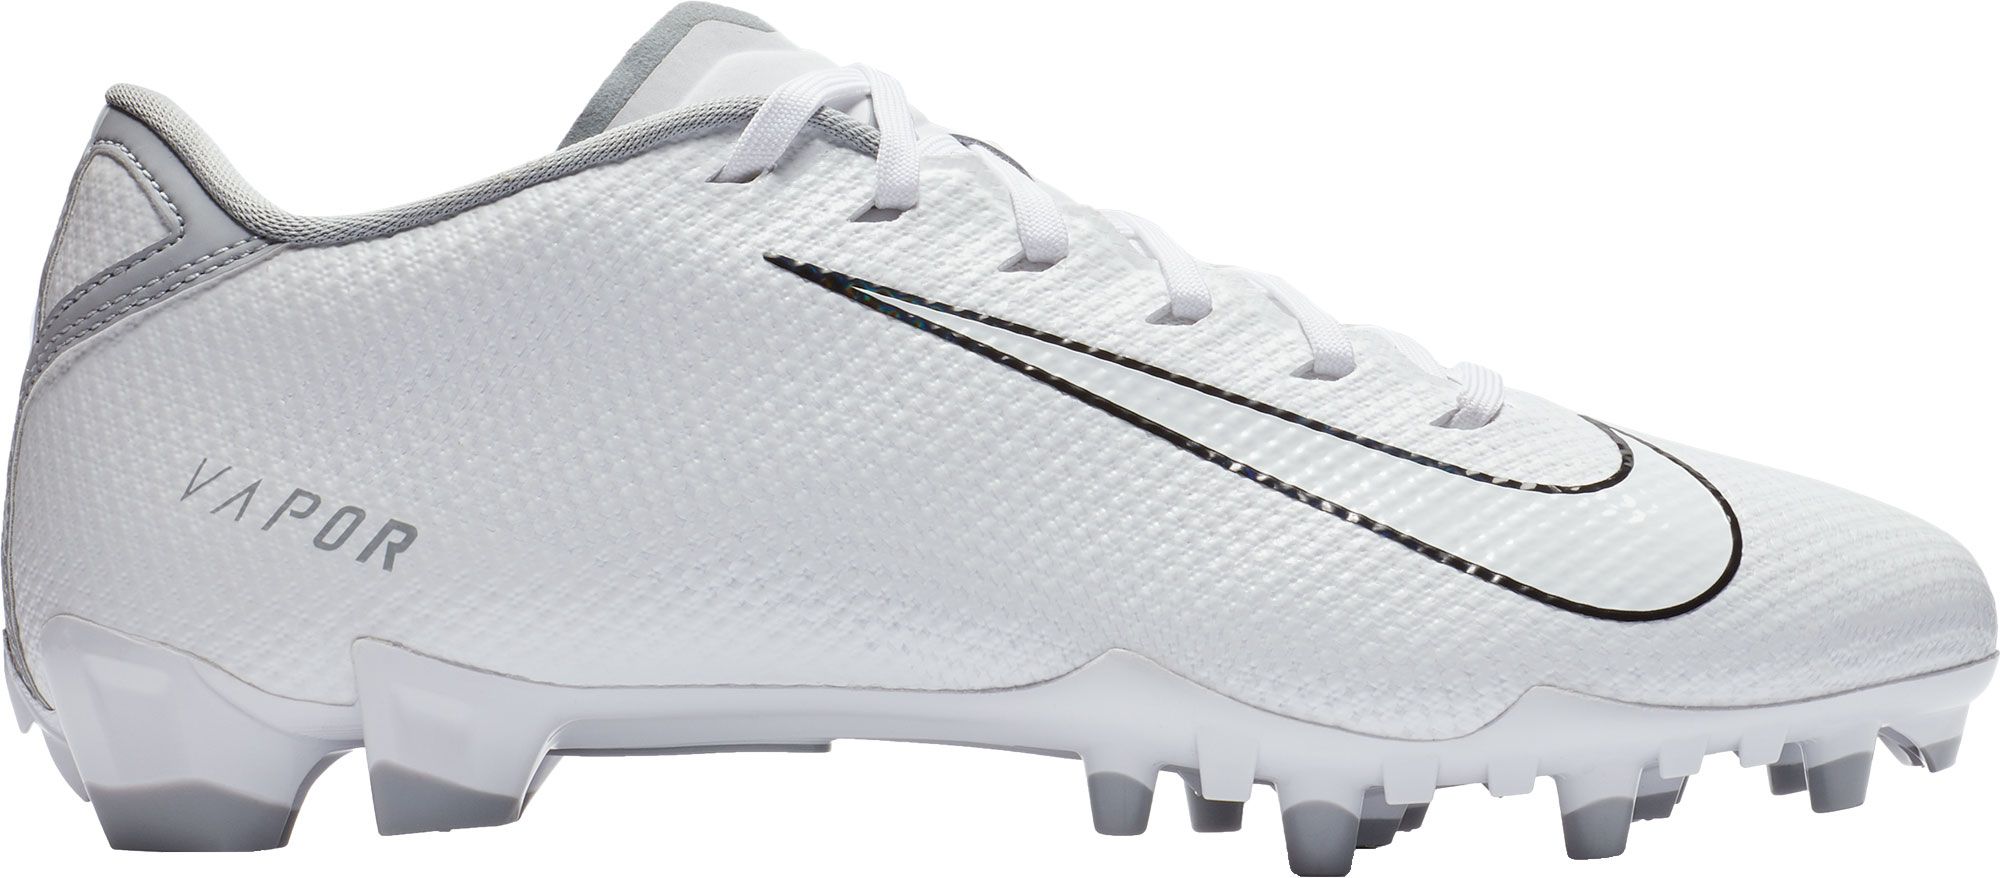 white nike low top football cleats